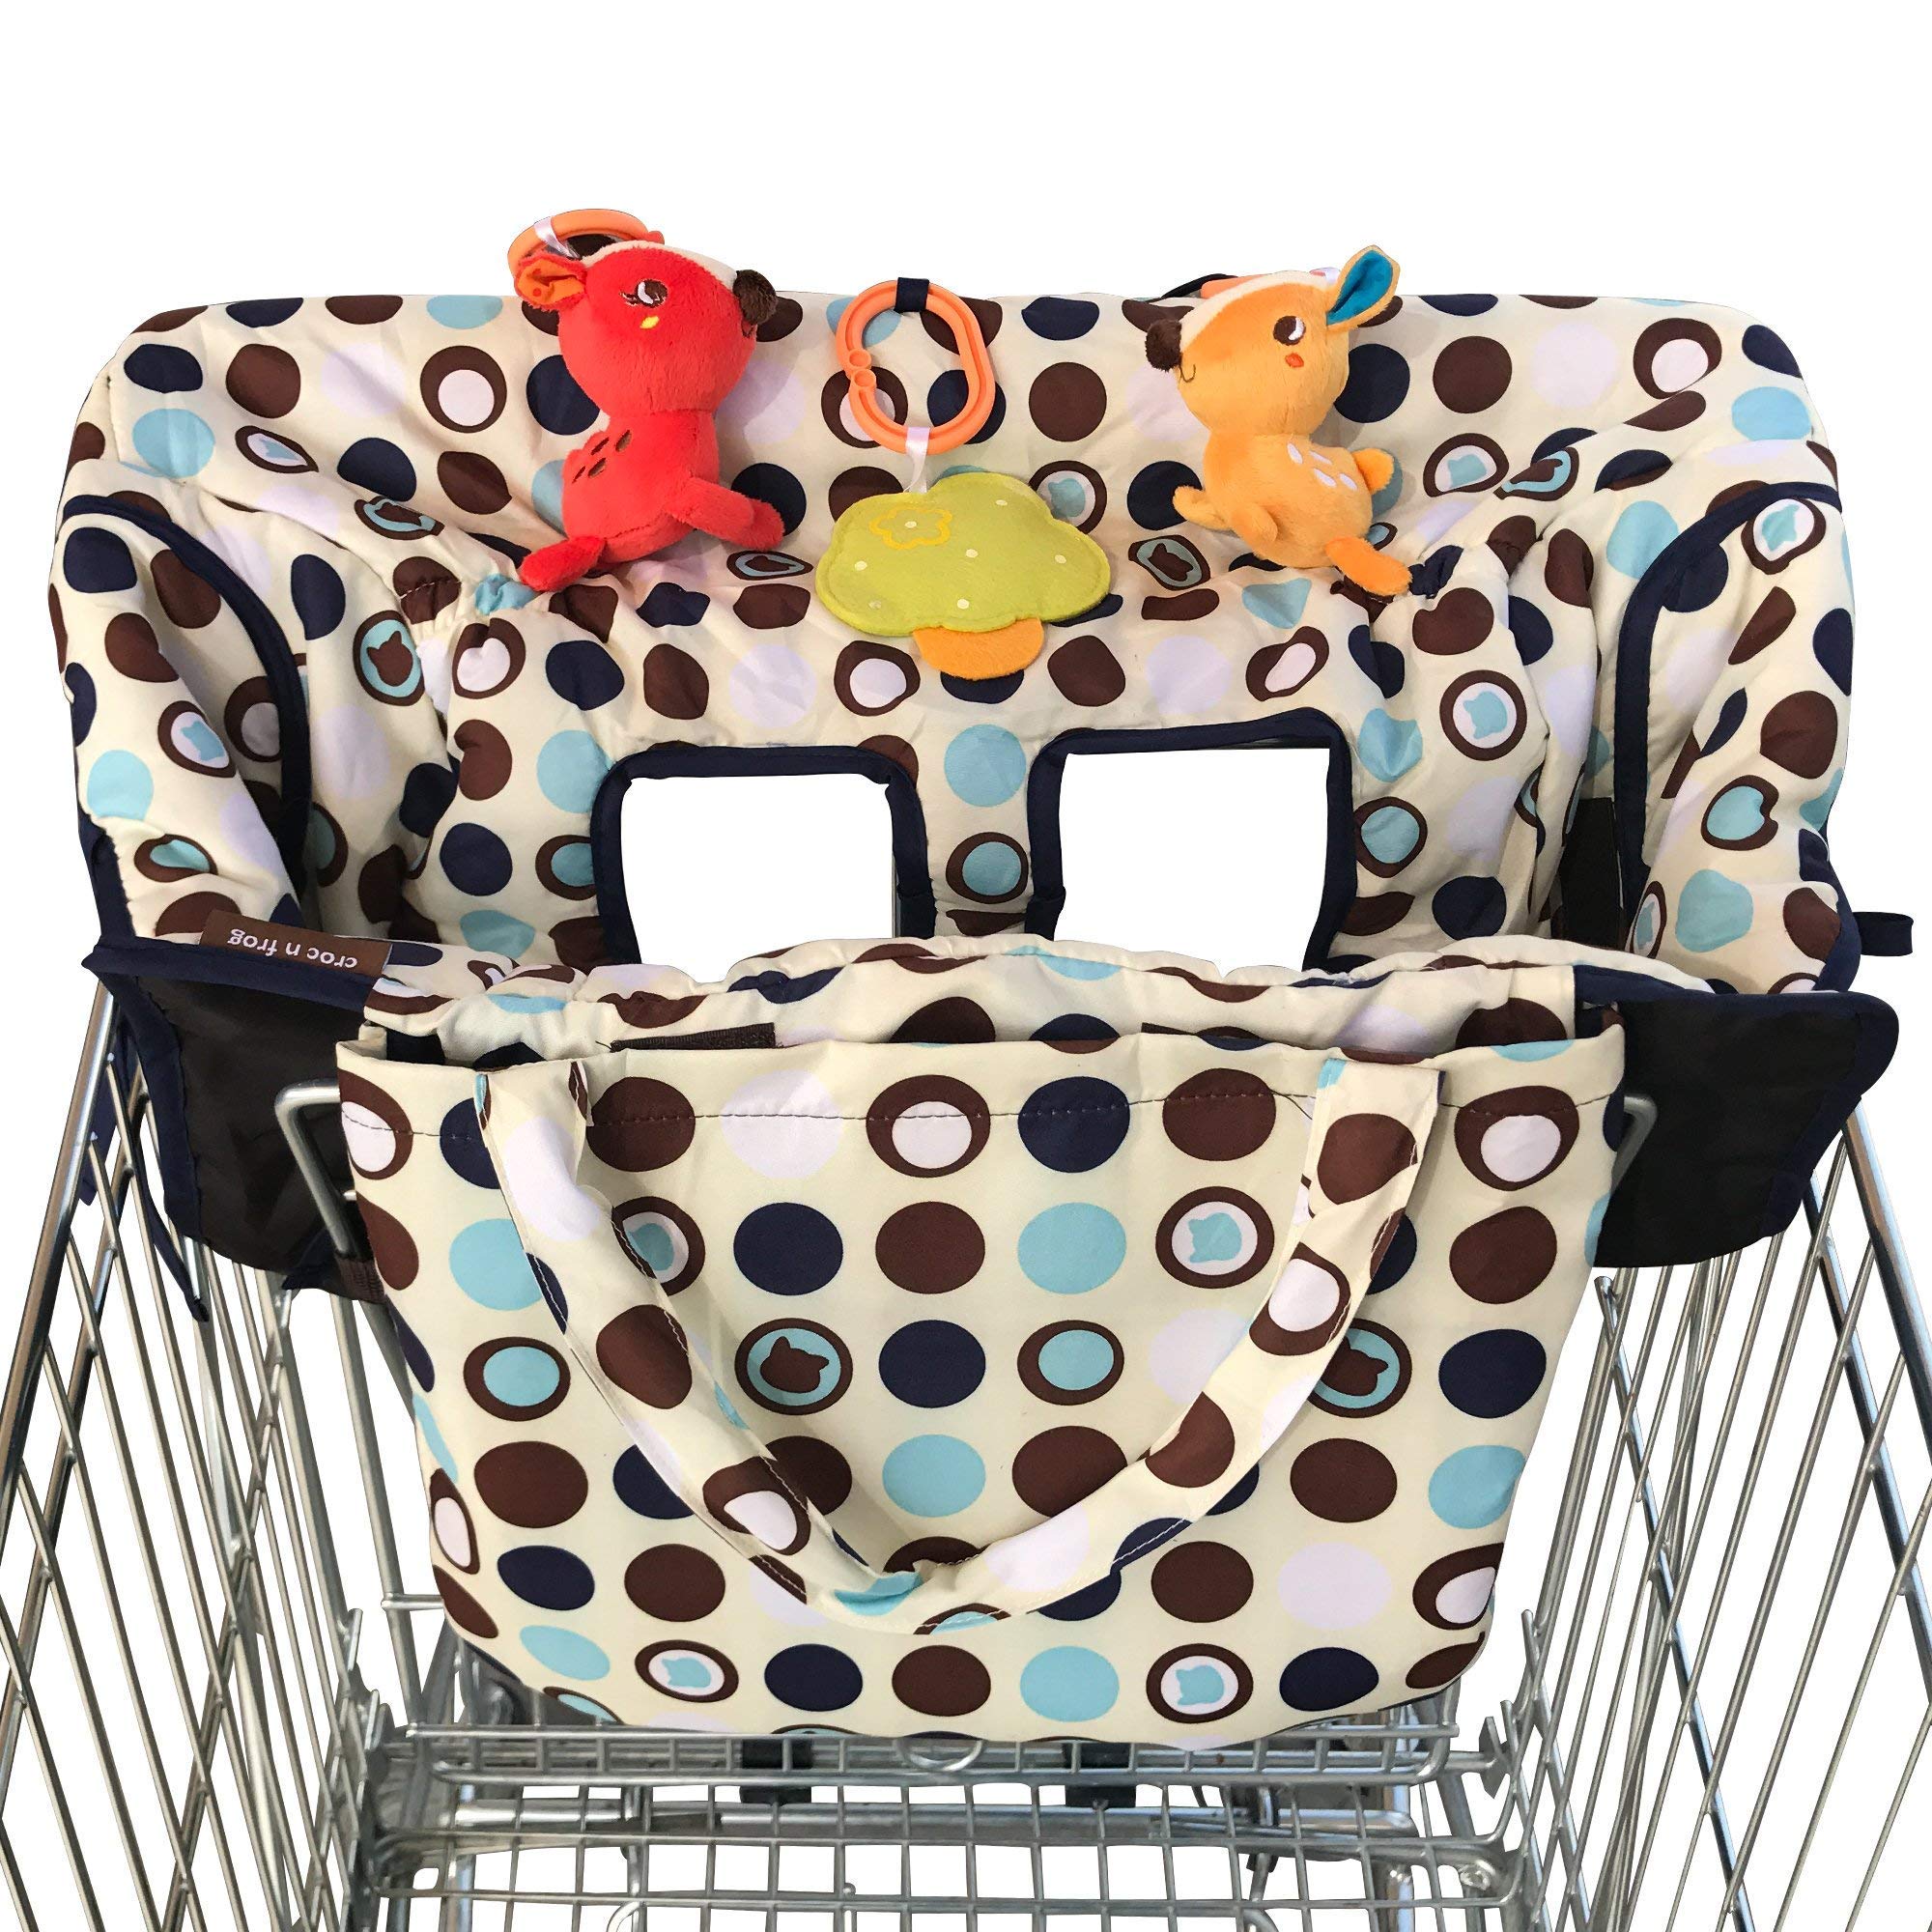 Shopping Cart Cover for Baby and High Chair Cover - 2 in 1 - Cart Cover for Girl or Boy - Soft Padded - 3 Toy Loops and Bottle Holder Included - Easy to Fold and Carry - Machine Washable - Perfect Baby Shower Gifts or Favors